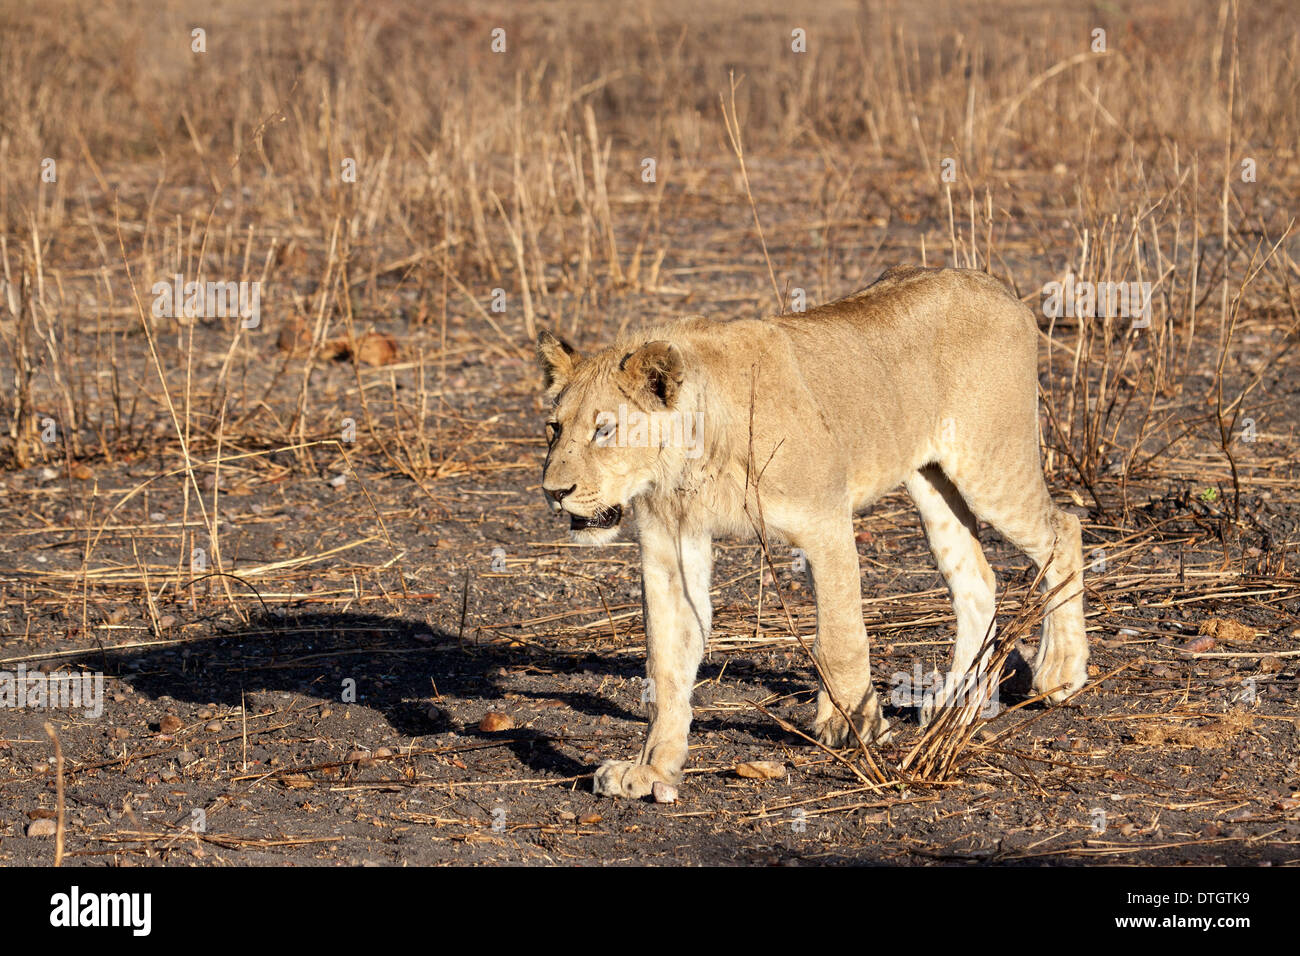 African lioness in Ruaha National Park, Tanzania Stock Photo